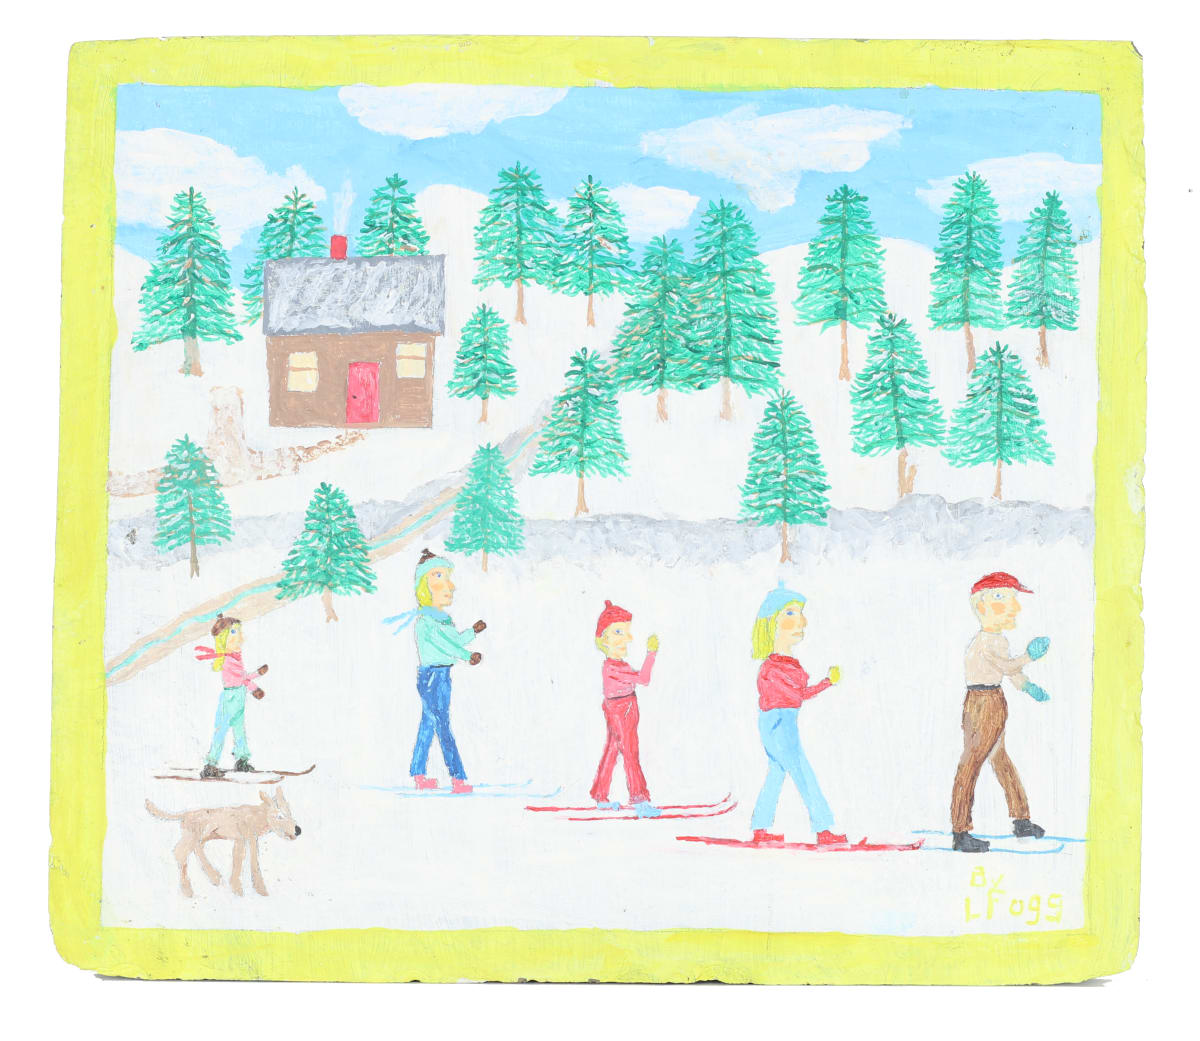 A Family Camping Weekend in The Family Mountains. A Skieing Weekend. by Lawrence Fogg  Image: A family skiing with evergreens and a cabin in the winter background on Slate.